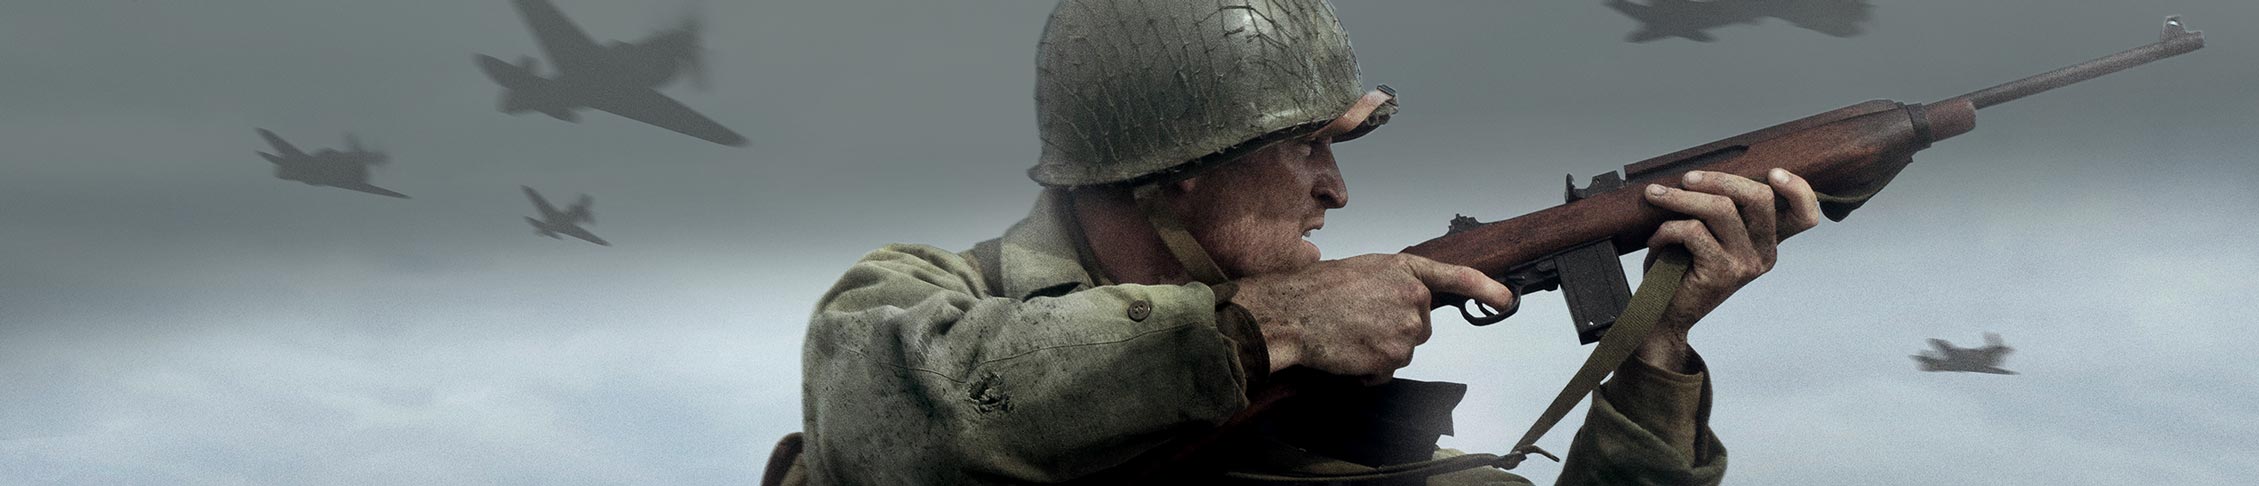 COD WW2 Commend a Soldier: How to Complete This Order in Call of